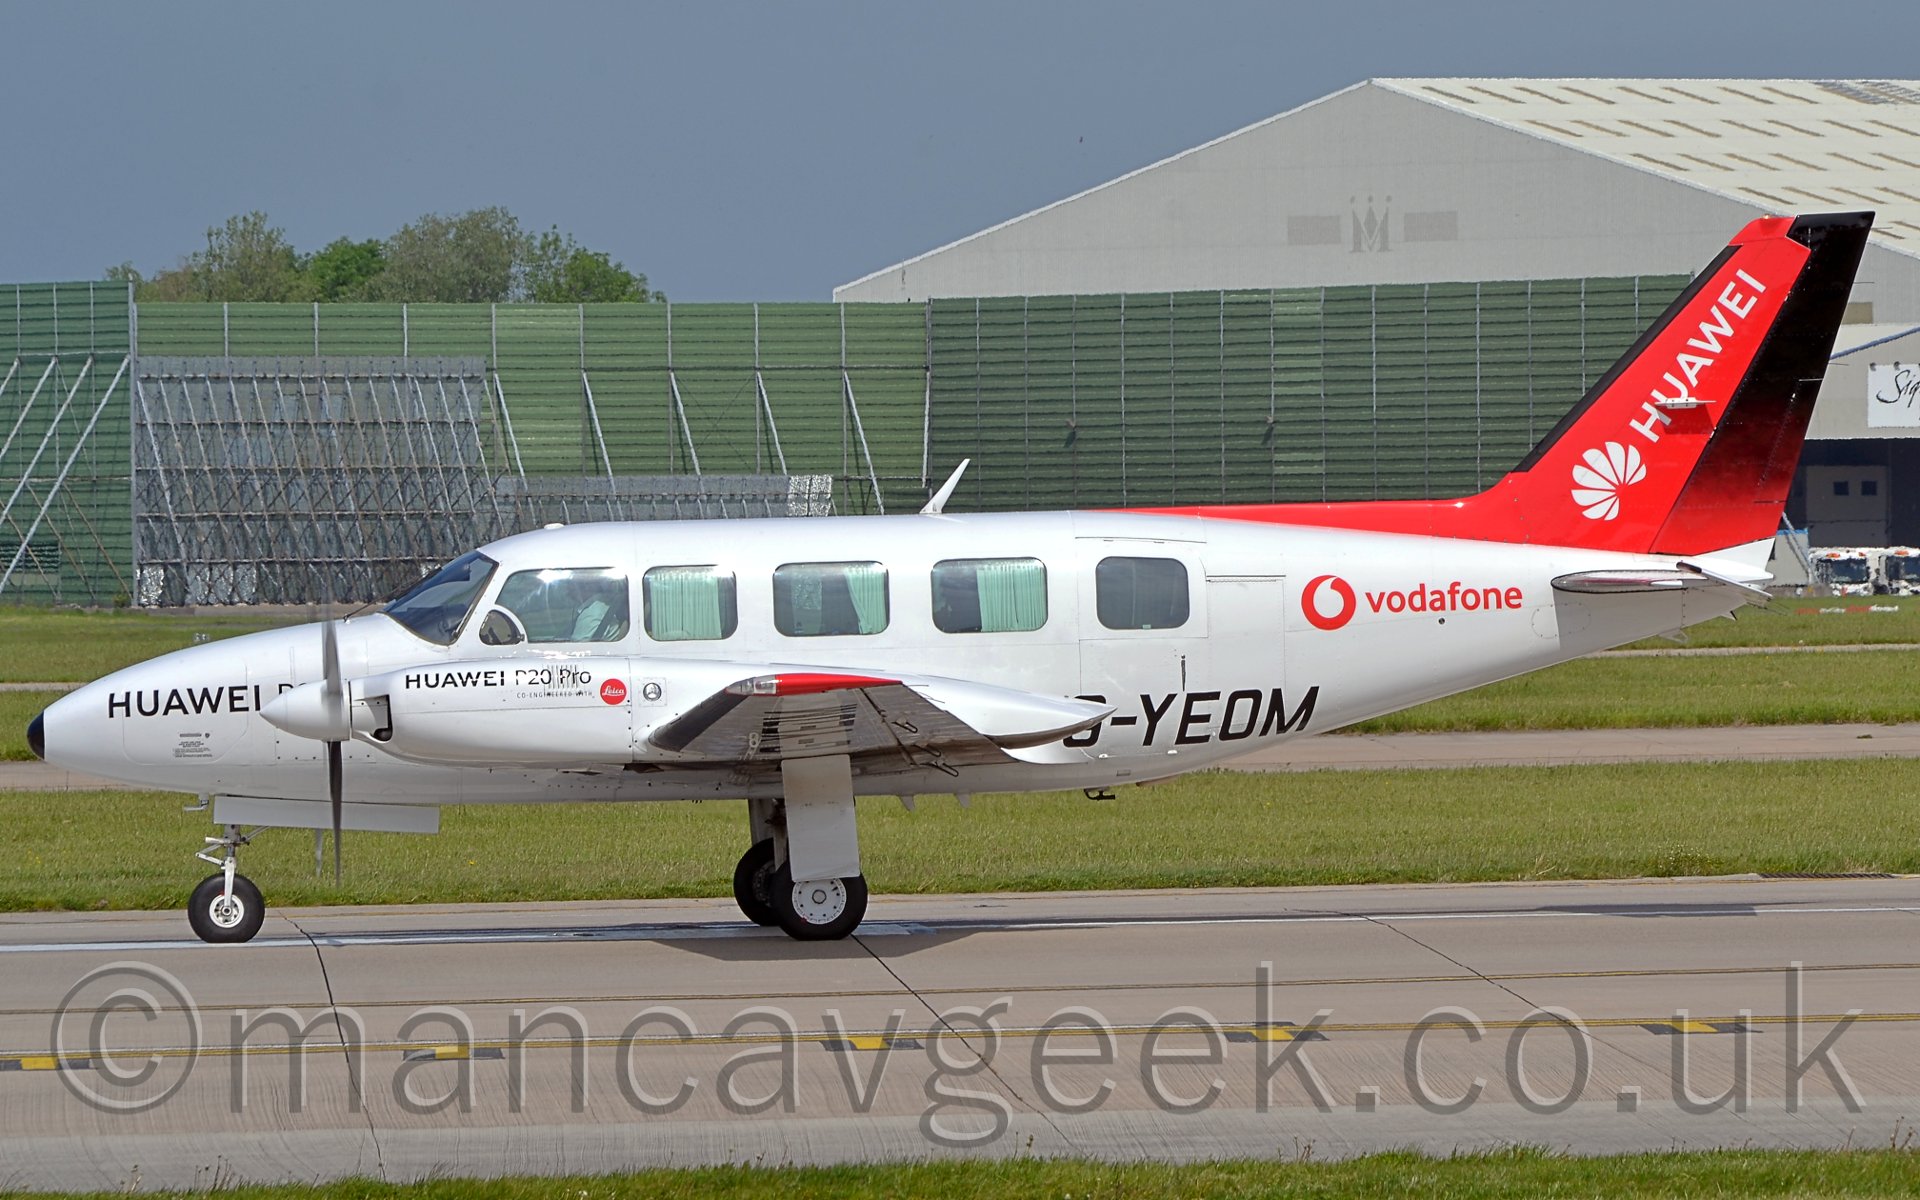 Side view of a twin propellor-engined light business aircraft parked facing to the left. The plane is mostly white, with black "Huawei P20 Pro" titles on the nose and engine cowlings, the registration "G-YEOM" in black on the lower rear fuselage and under the left wing, and a red circle with a white apostrophe in the center, next to red "Vodafone" titles on the upper rear fuselage. The tail is red, with diagonal white "Huawei" titles. In the background, a large, green, open square metal frame can be seen, in front of a large grey hangar on the right of the frame. Above, the sky is a light blue-grey.